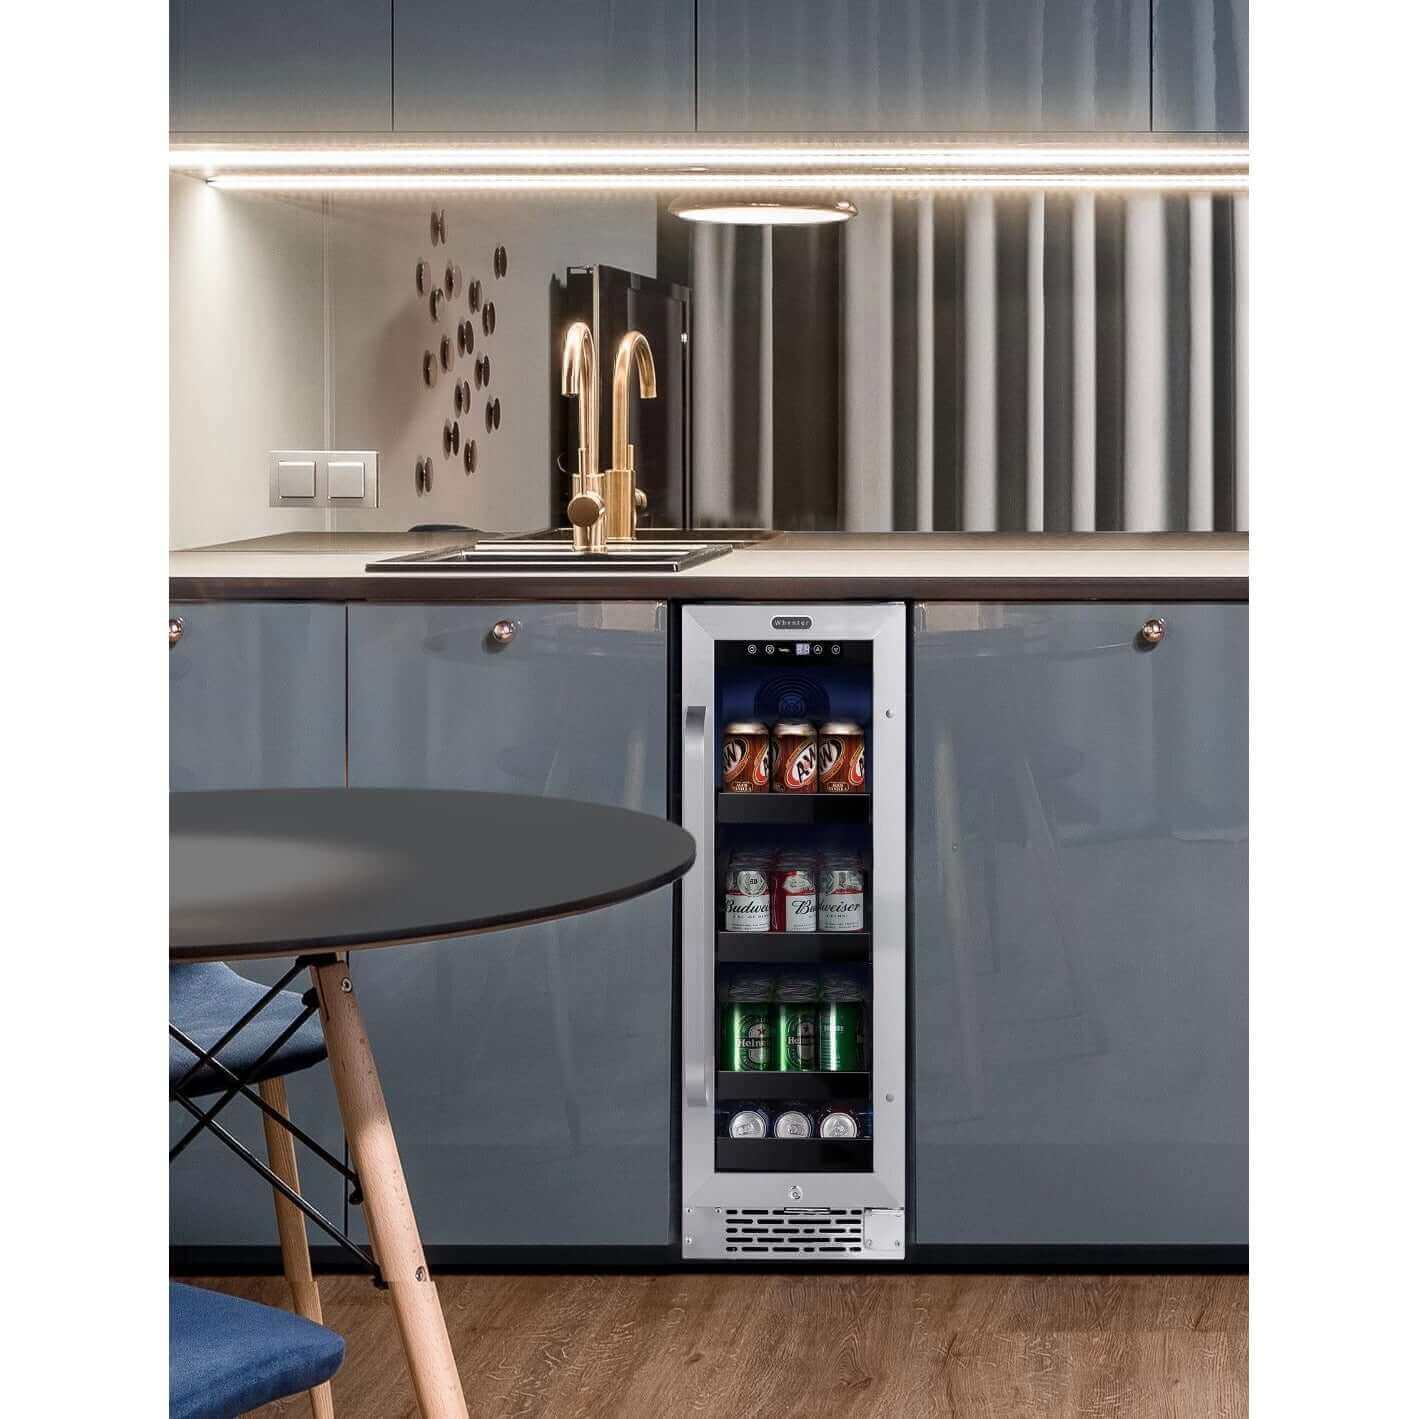 Whynter BBR-638SB 12 inch Built-in 60 Can Undercounter Stainless Steel Beverage Refrigerator